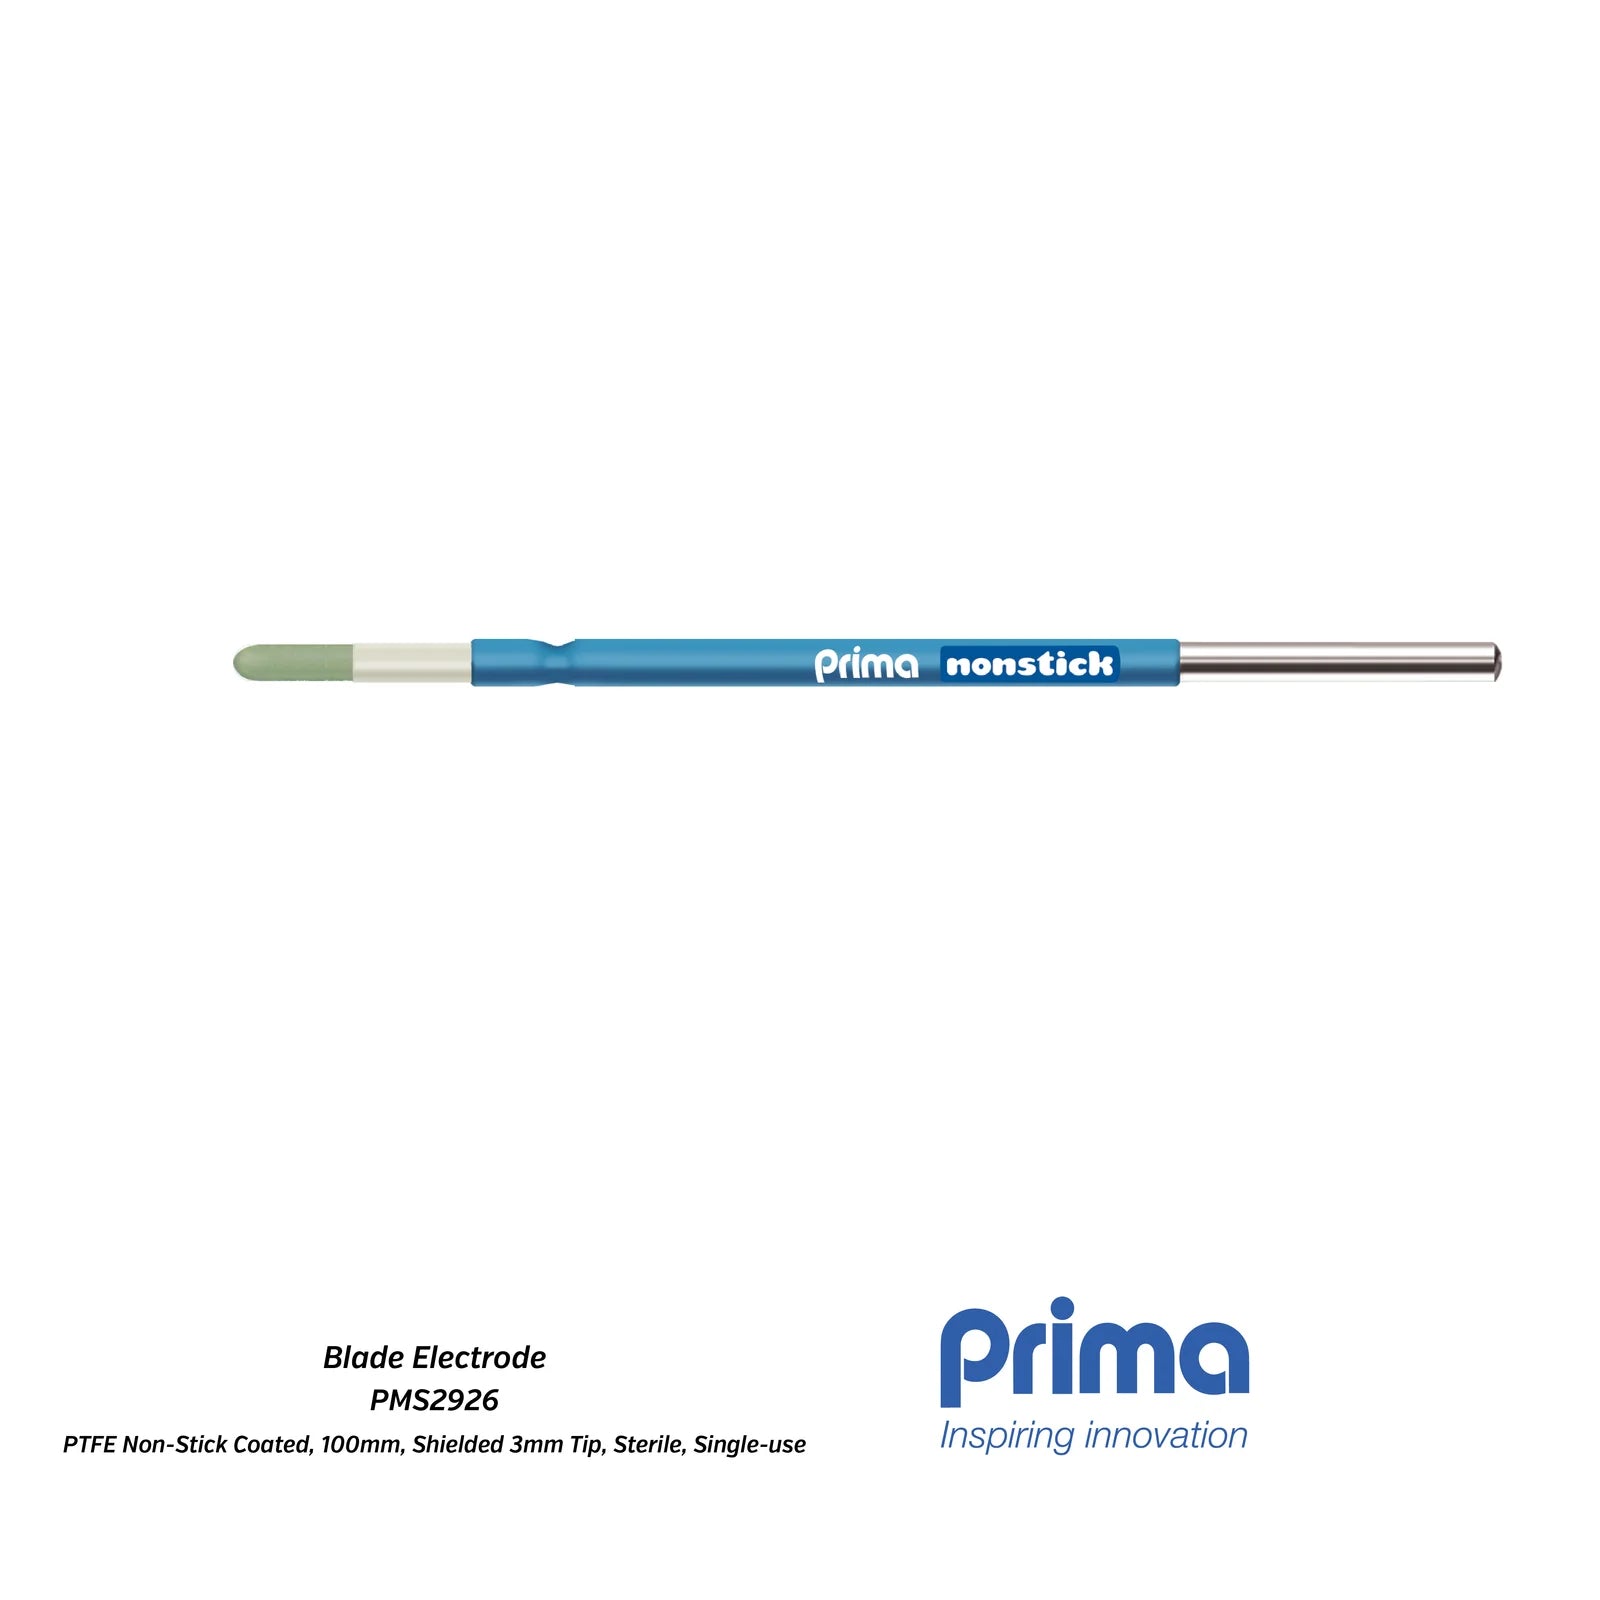 Blade Electrode (PTFE Non-Stick Coated, Shielded Tip, 100mm LGTH)